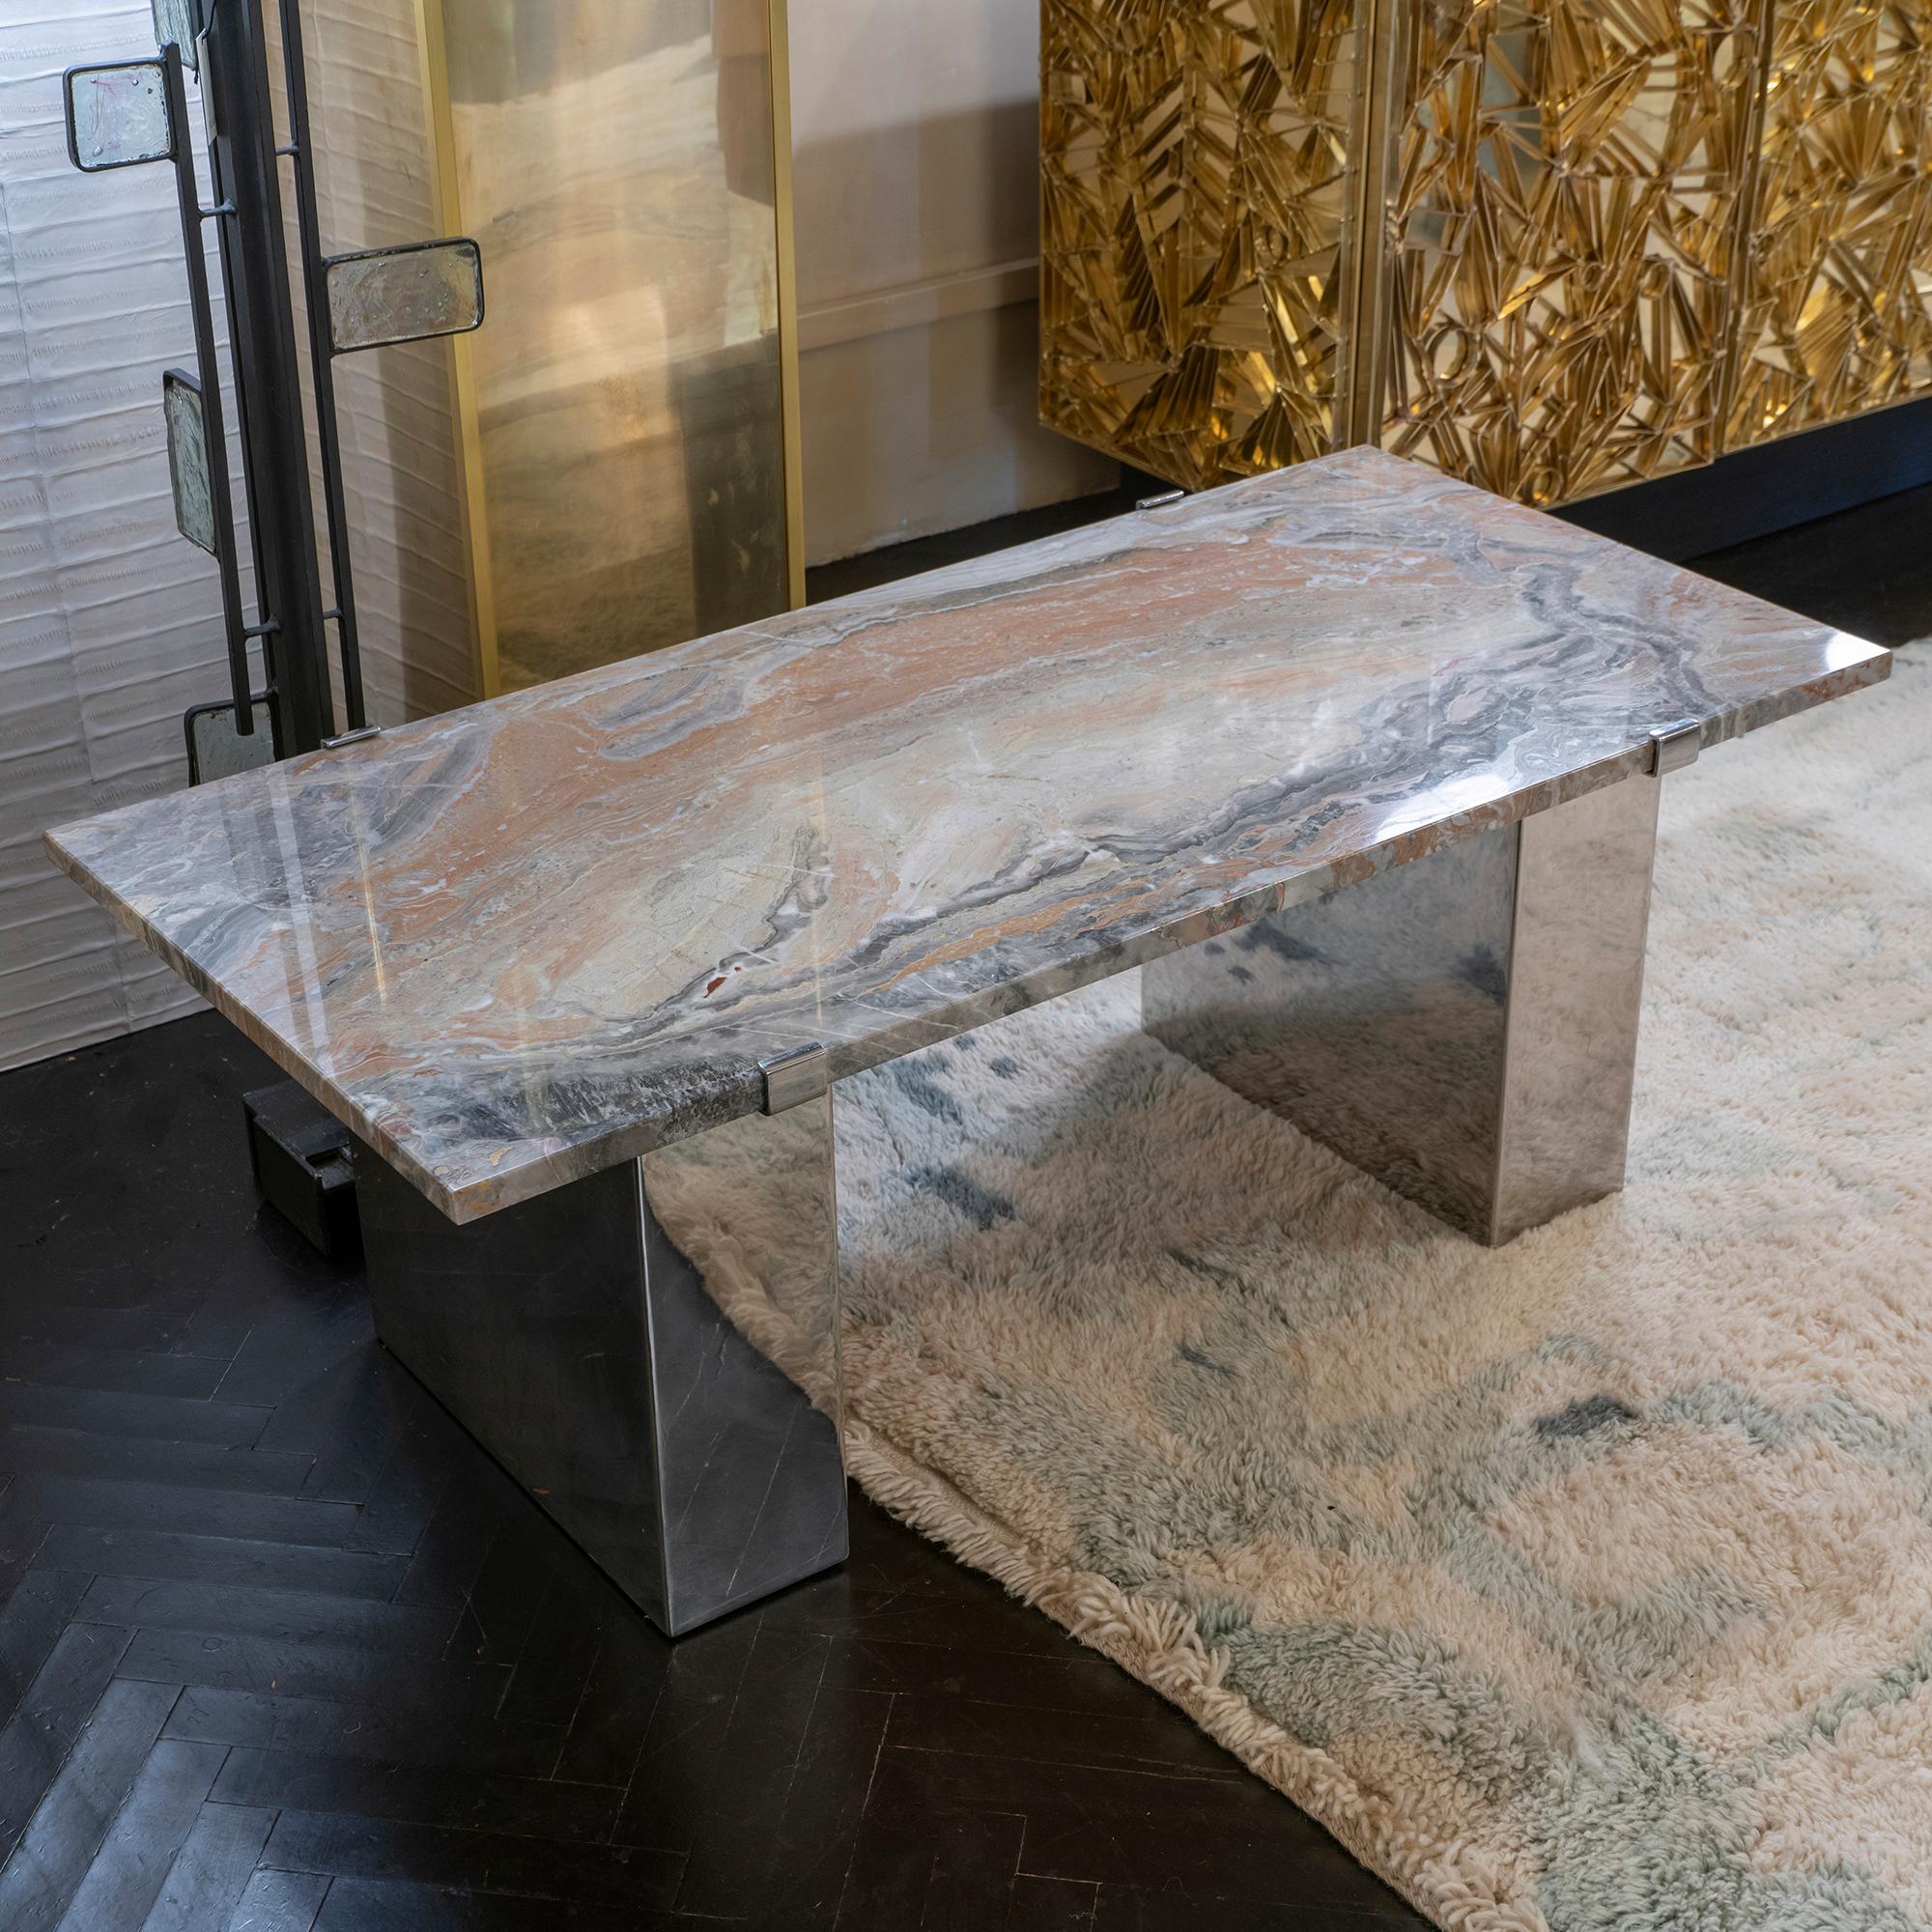 1970s Italian coffee table with Arabescato marble top that is inserted over a wood structure, polished chrome bases.